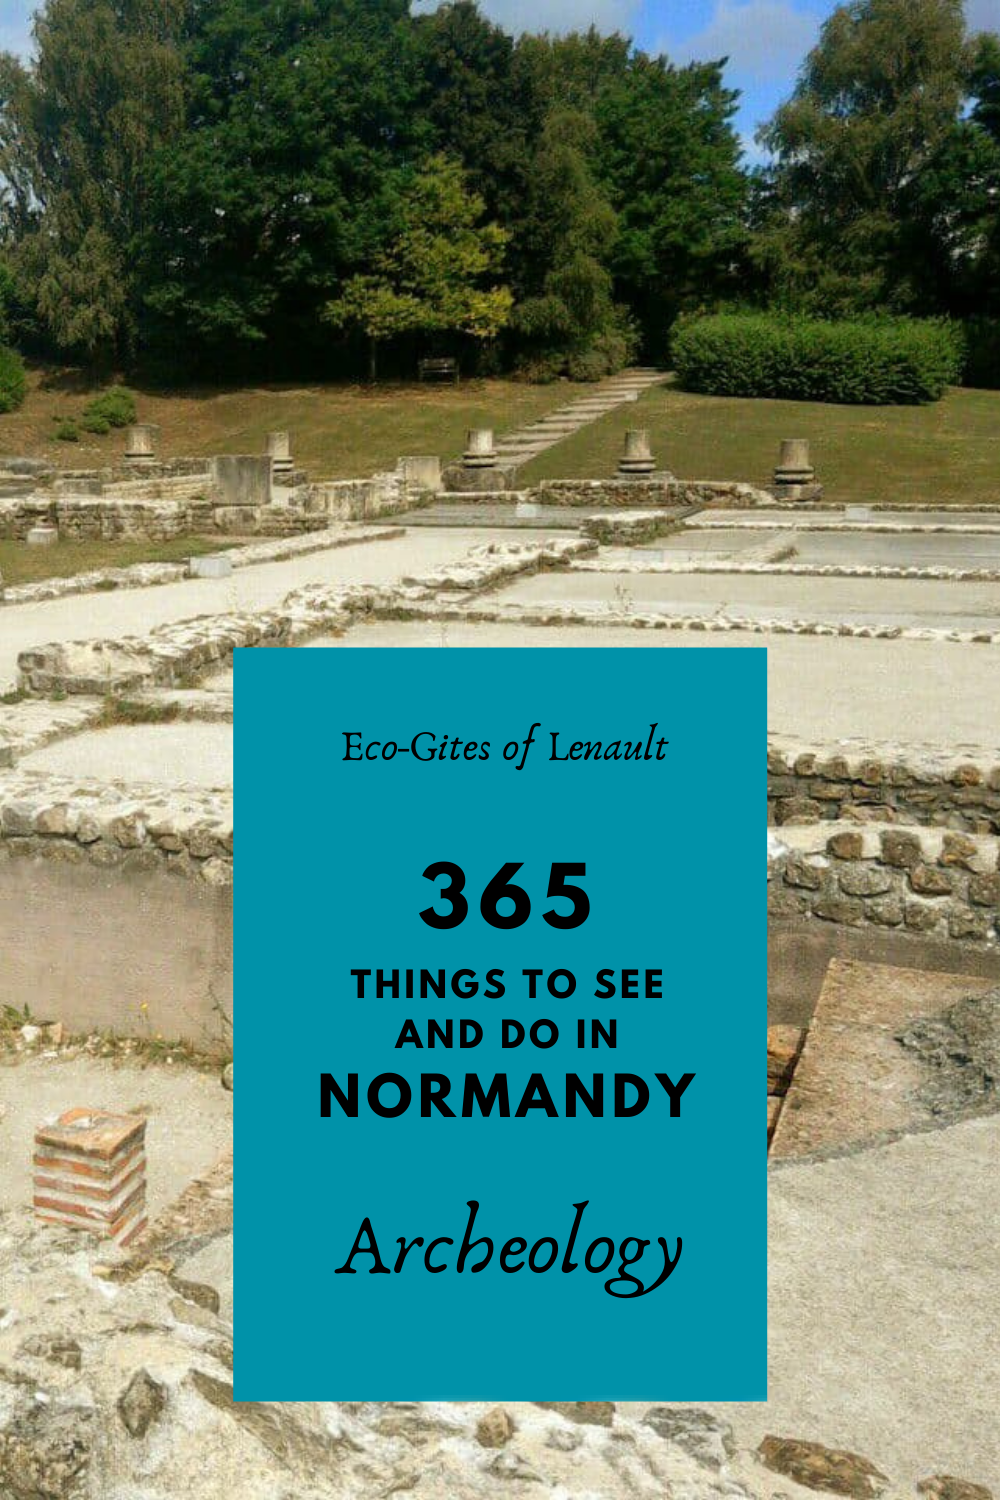 Archeological sites in Normandy